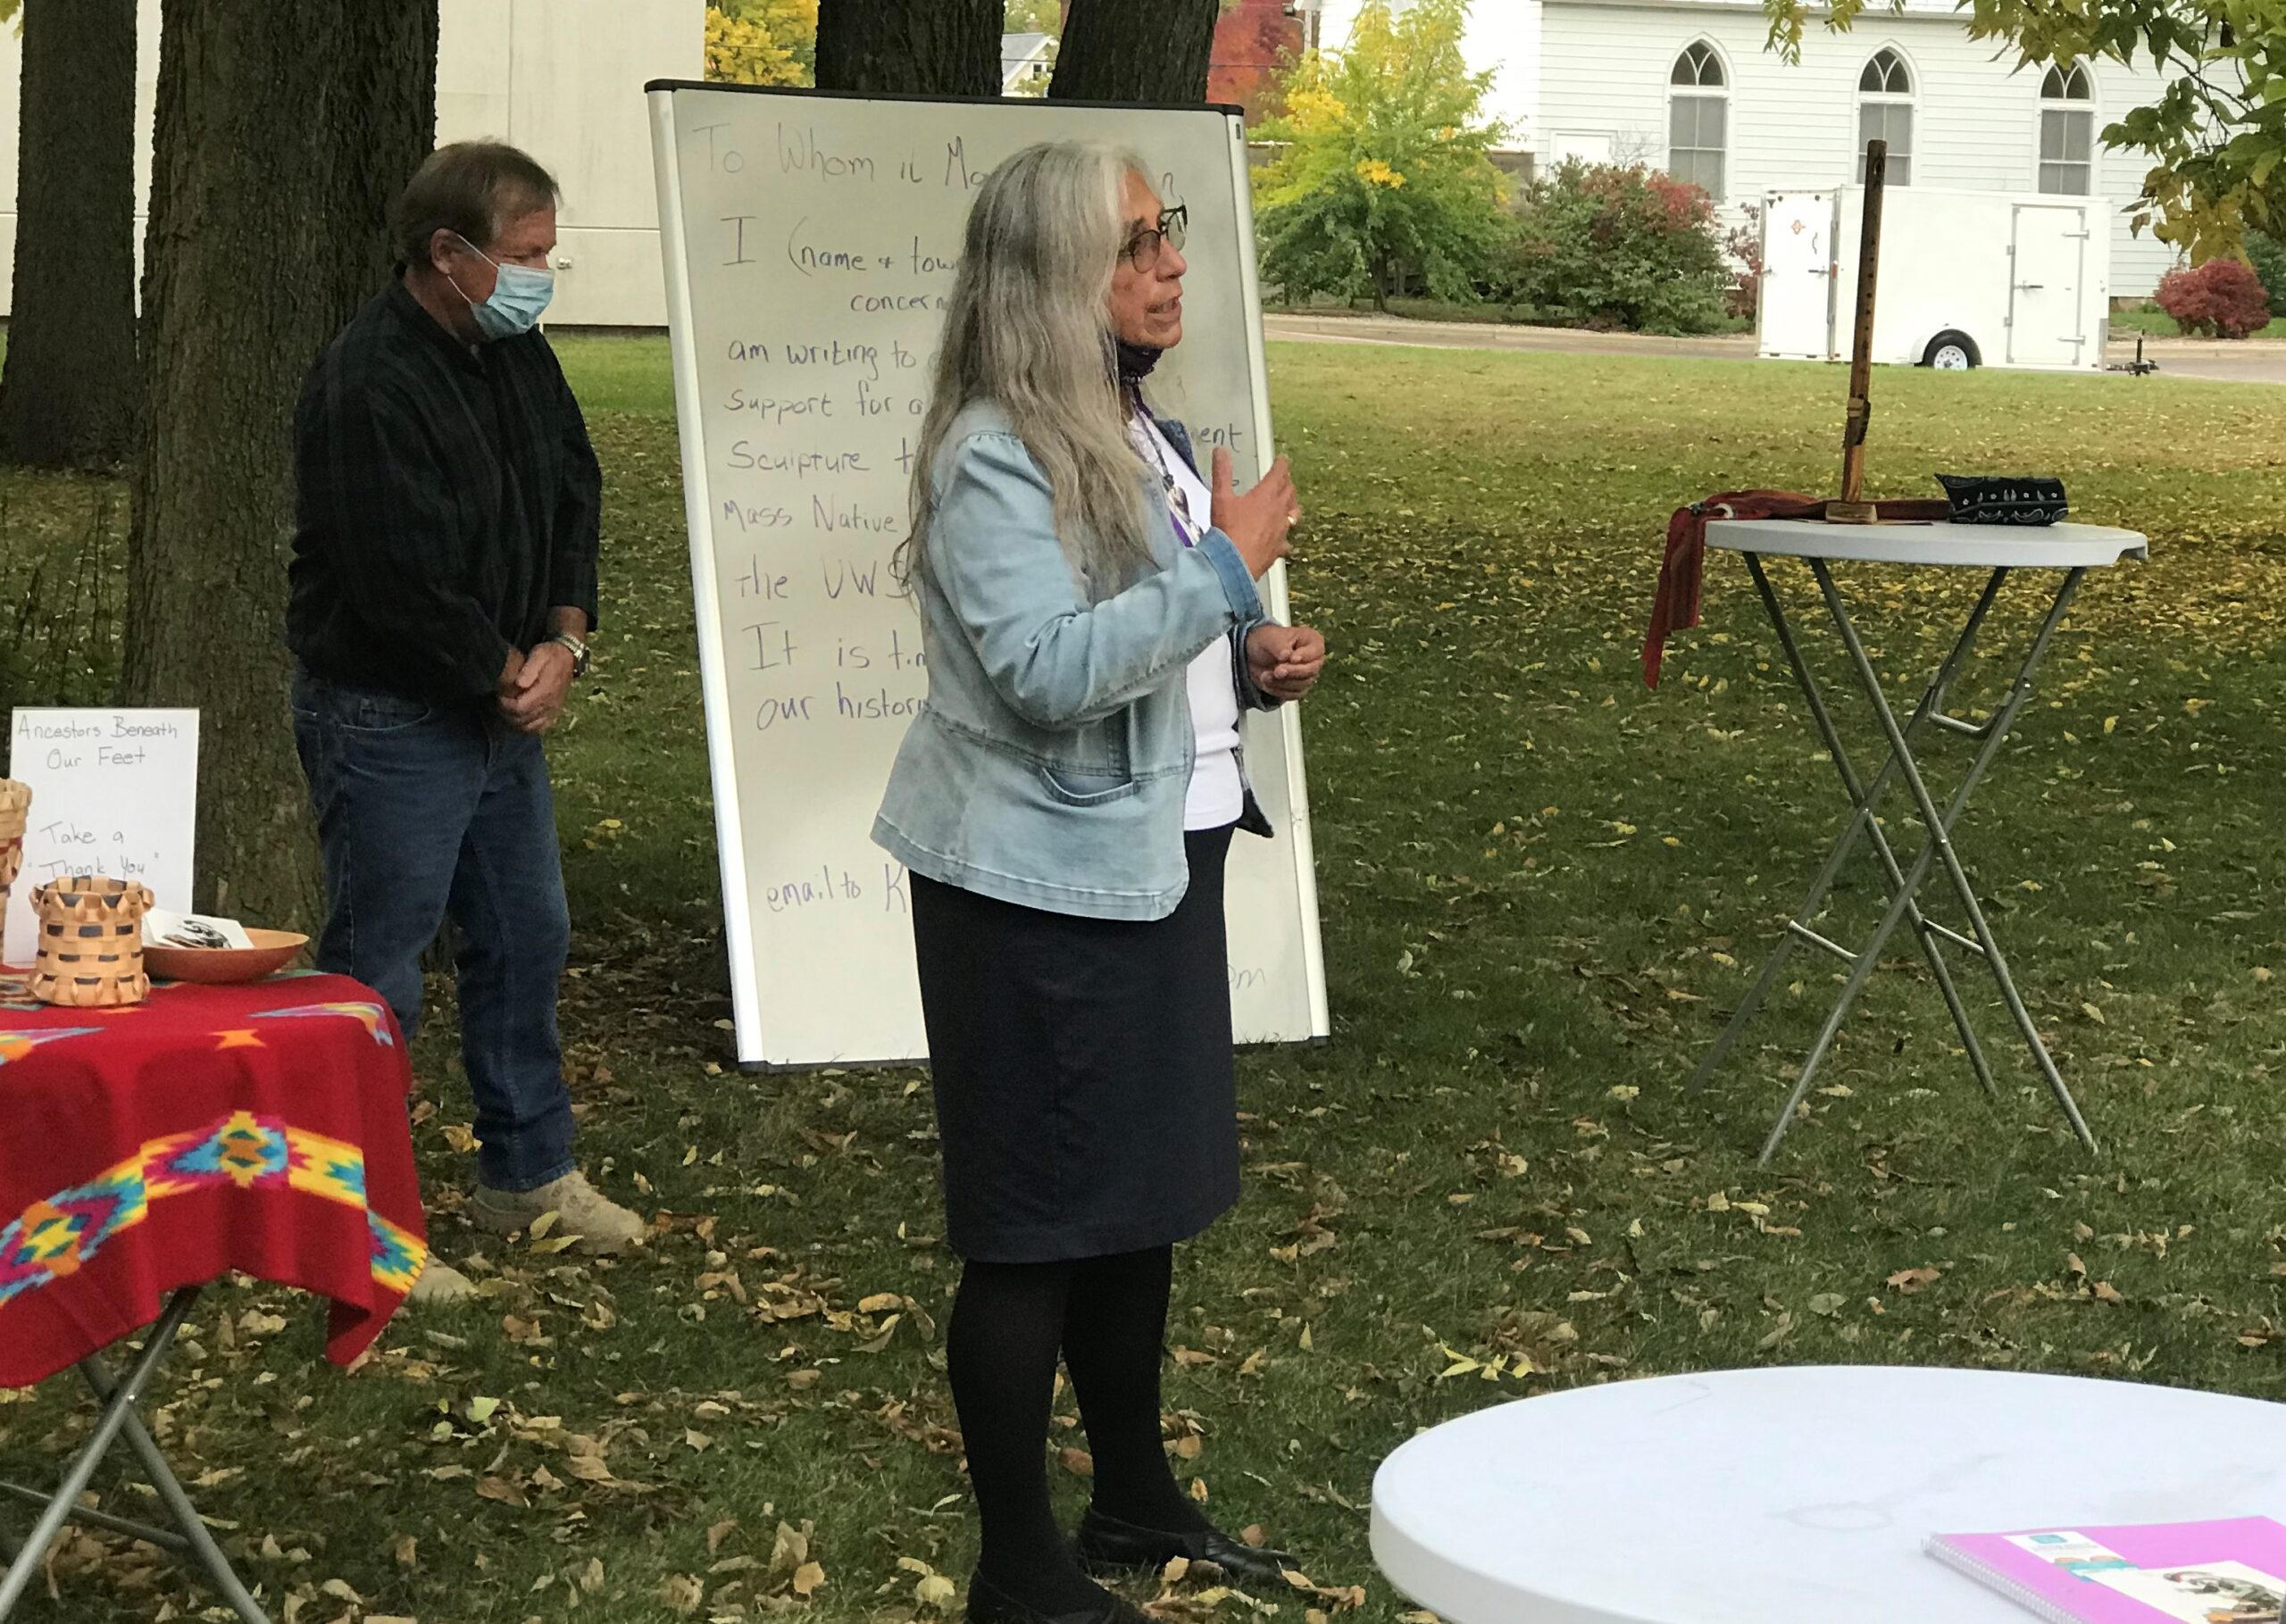 Push To Mark Indian Burial Ground At UW-Stevens Point Gets Community Support